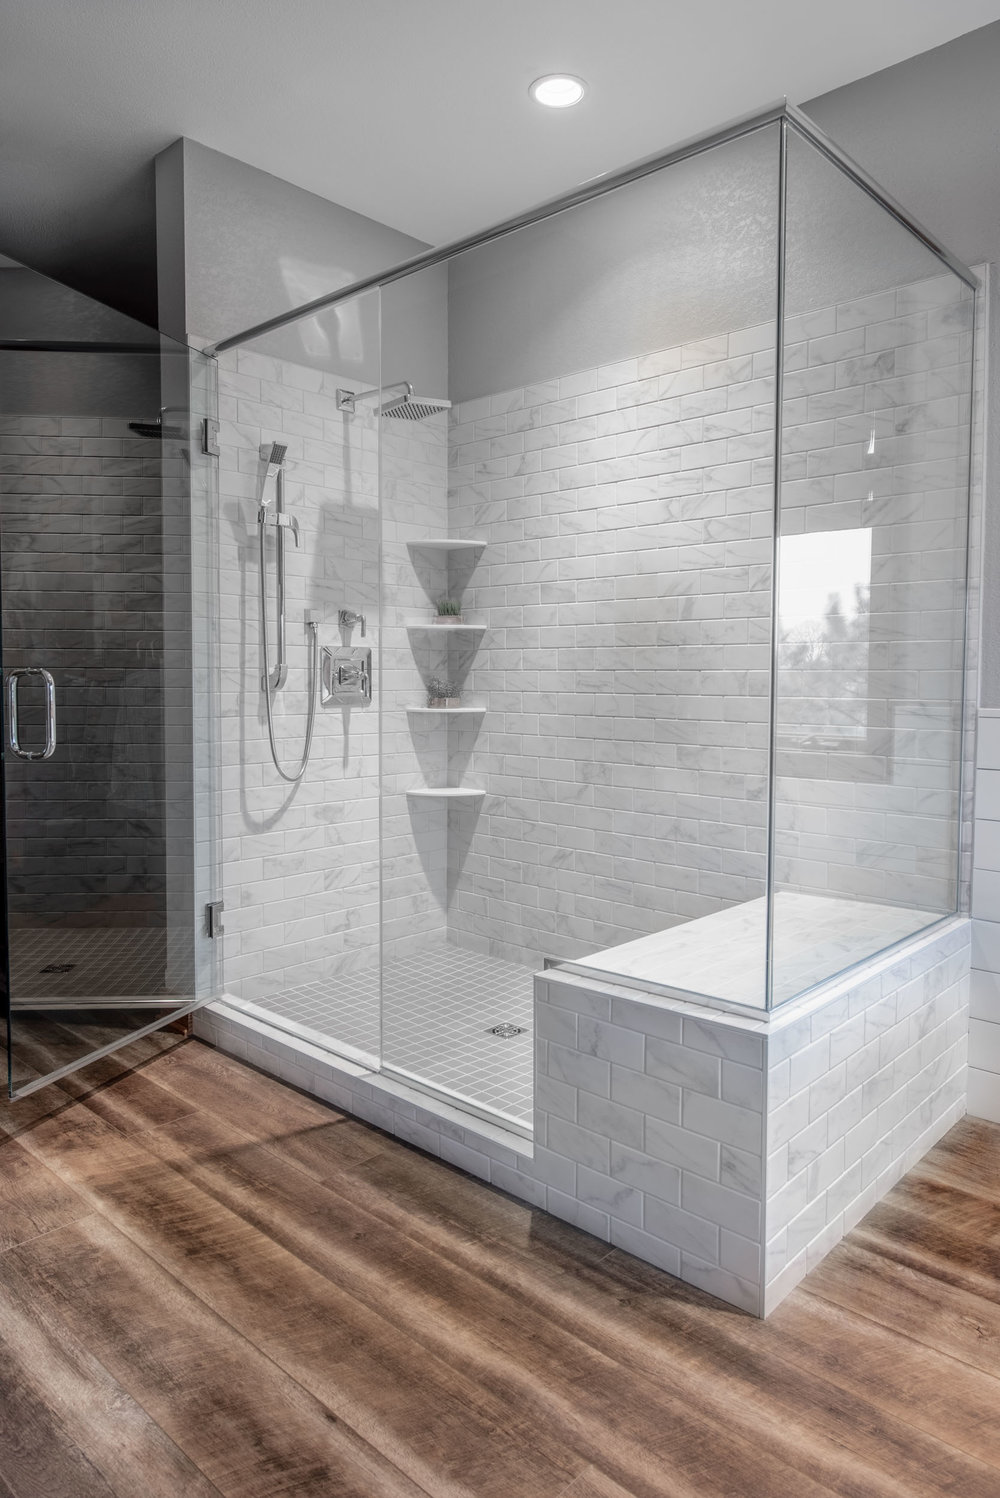 How To Choose Shower Tile When, How To Choose Tile For Bathroom Remodel